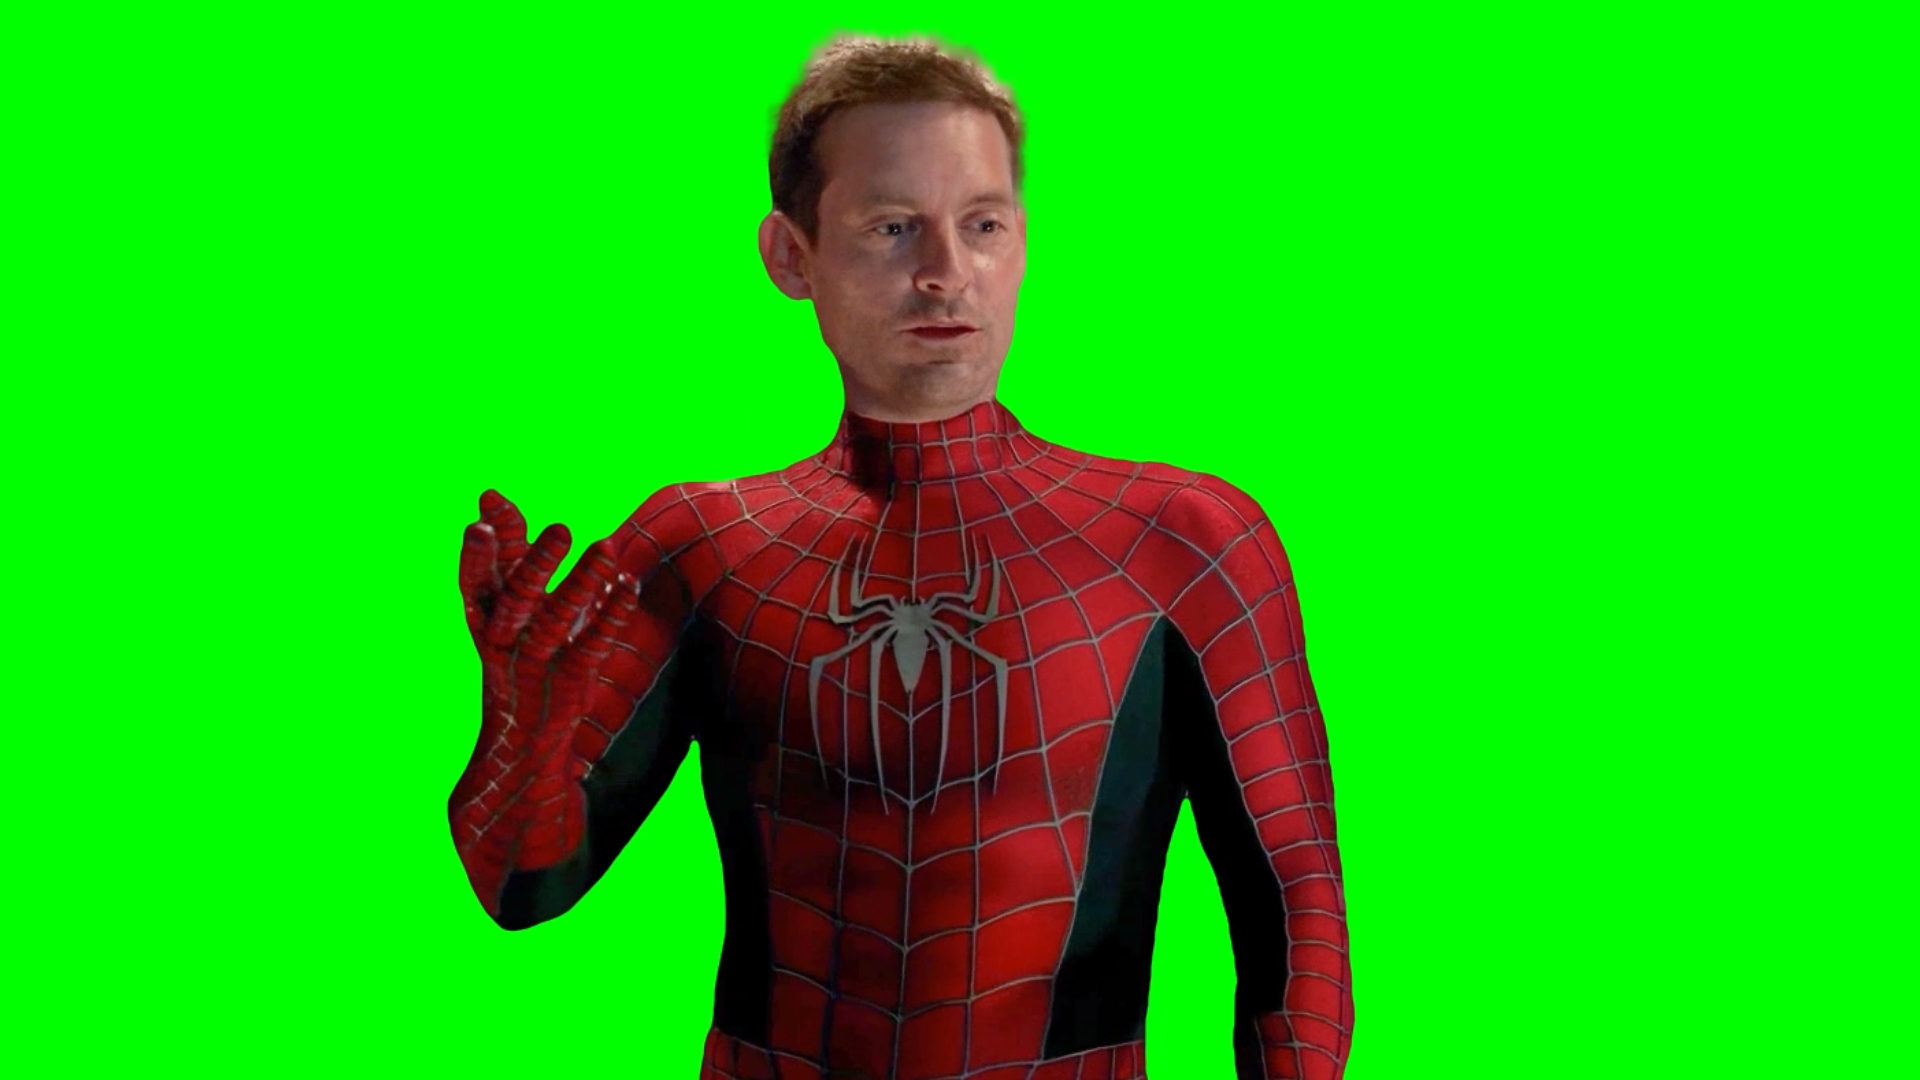 I wish I could tell you, breathing just happens - Spider-Man: No Way Home (Green Screen)